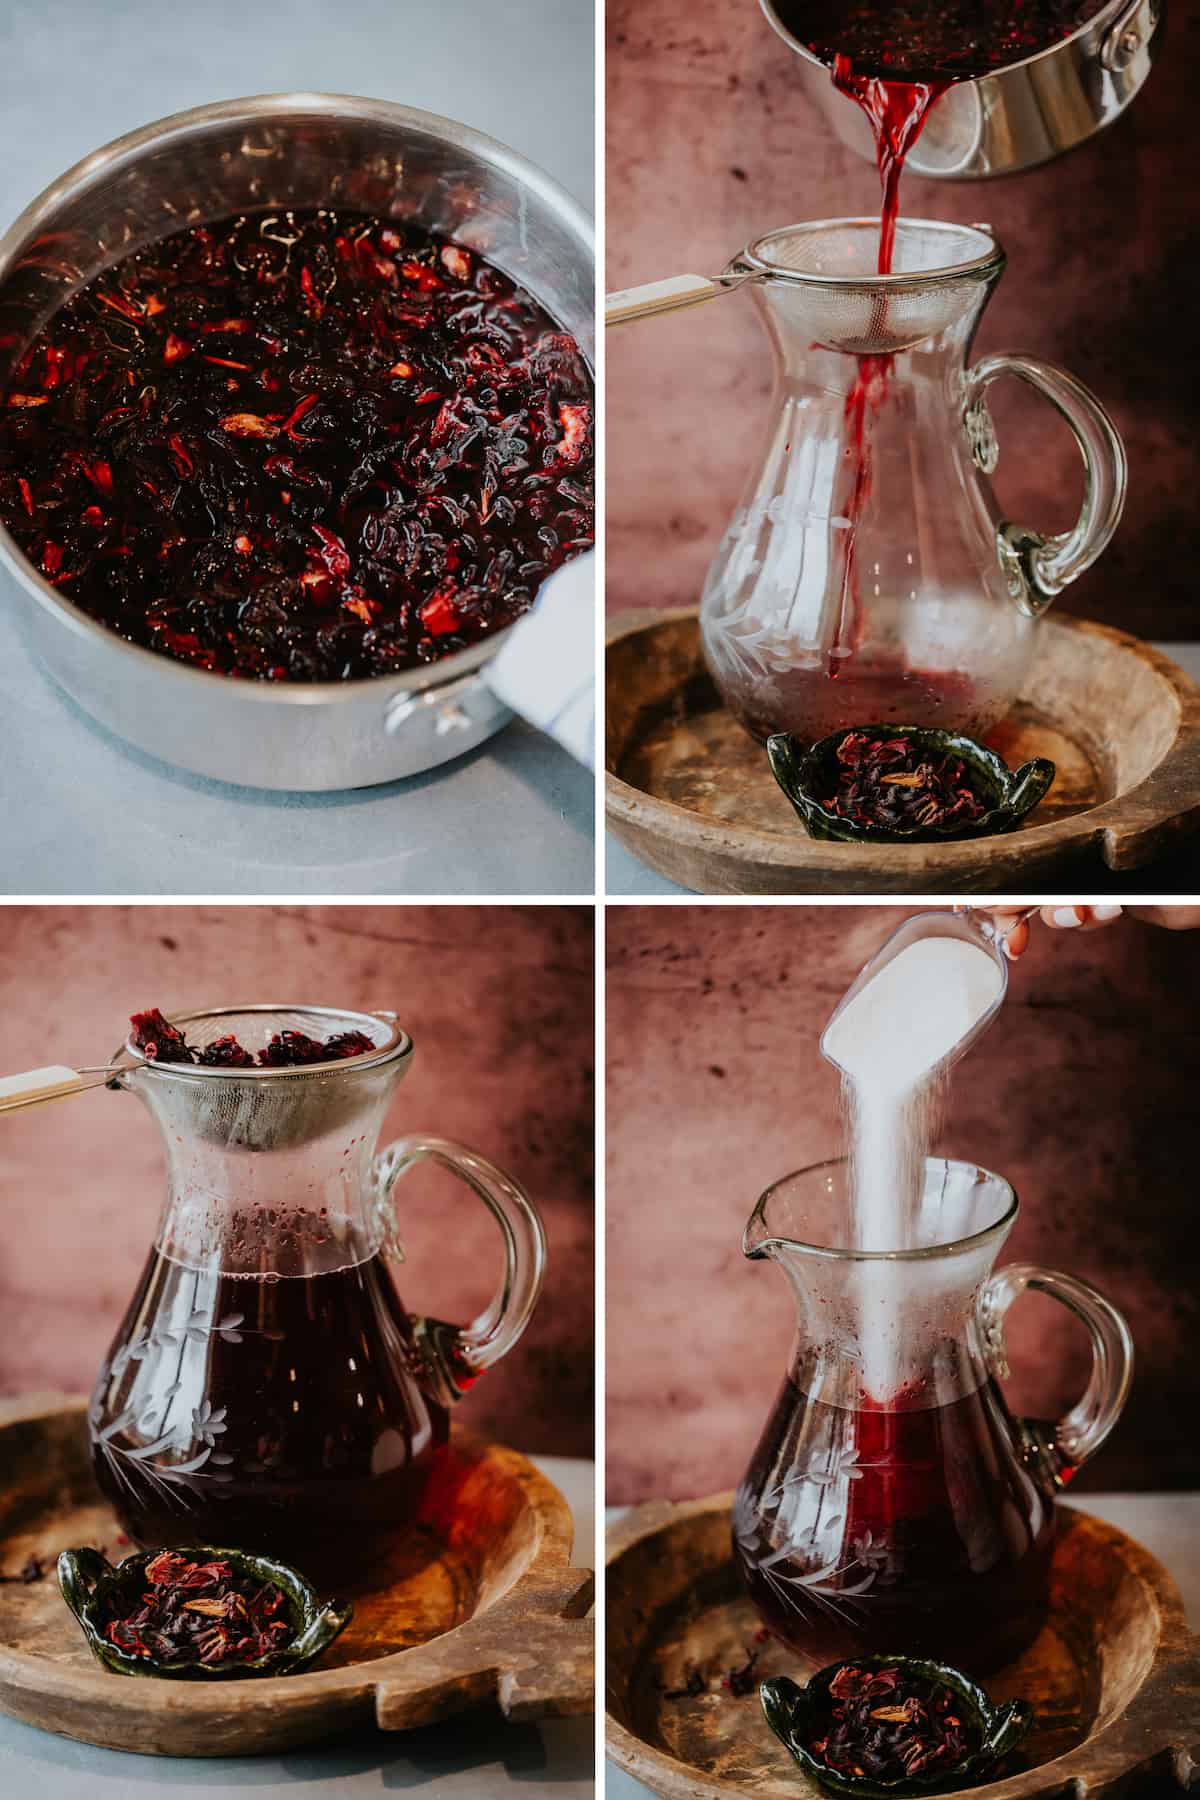 grid-style collage showing the steps to make Mexican agua de jamaica — steeping the hibiscus in hot water, decanting the tea into a pretty glass pitcher, straining out the hibiscus leaves, adding sugar. 